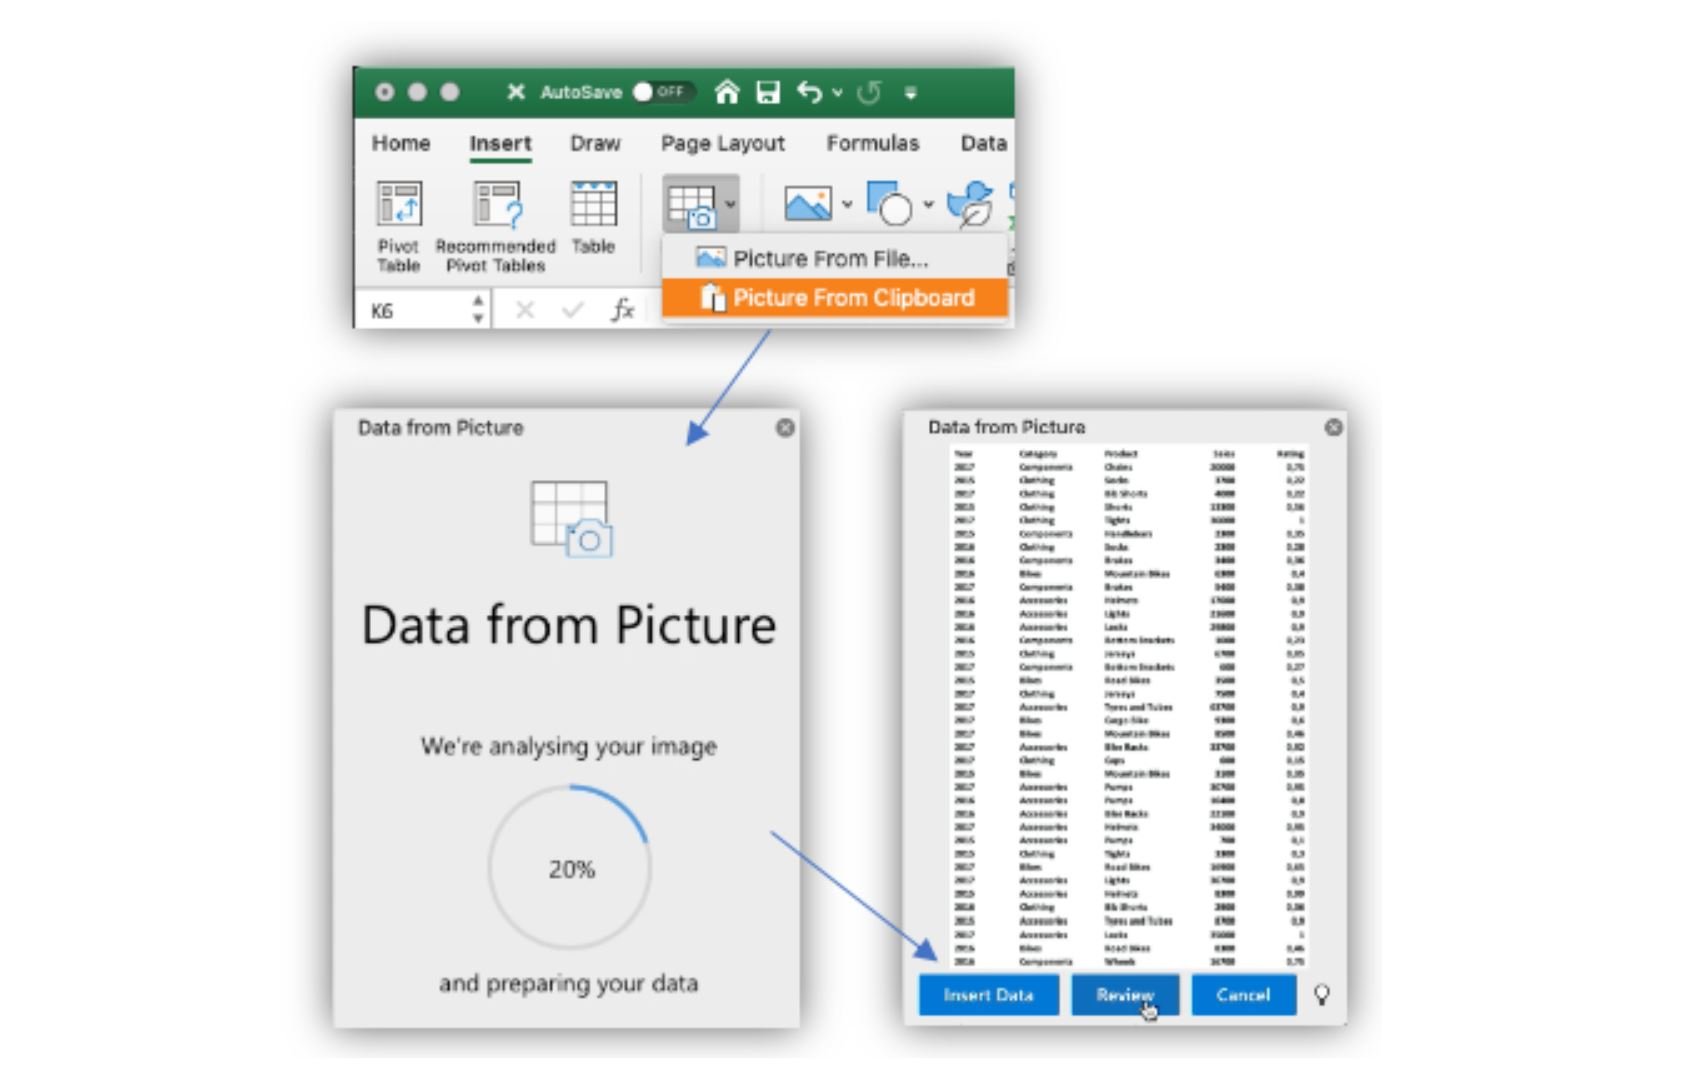 whats the most updated version of excel for mac